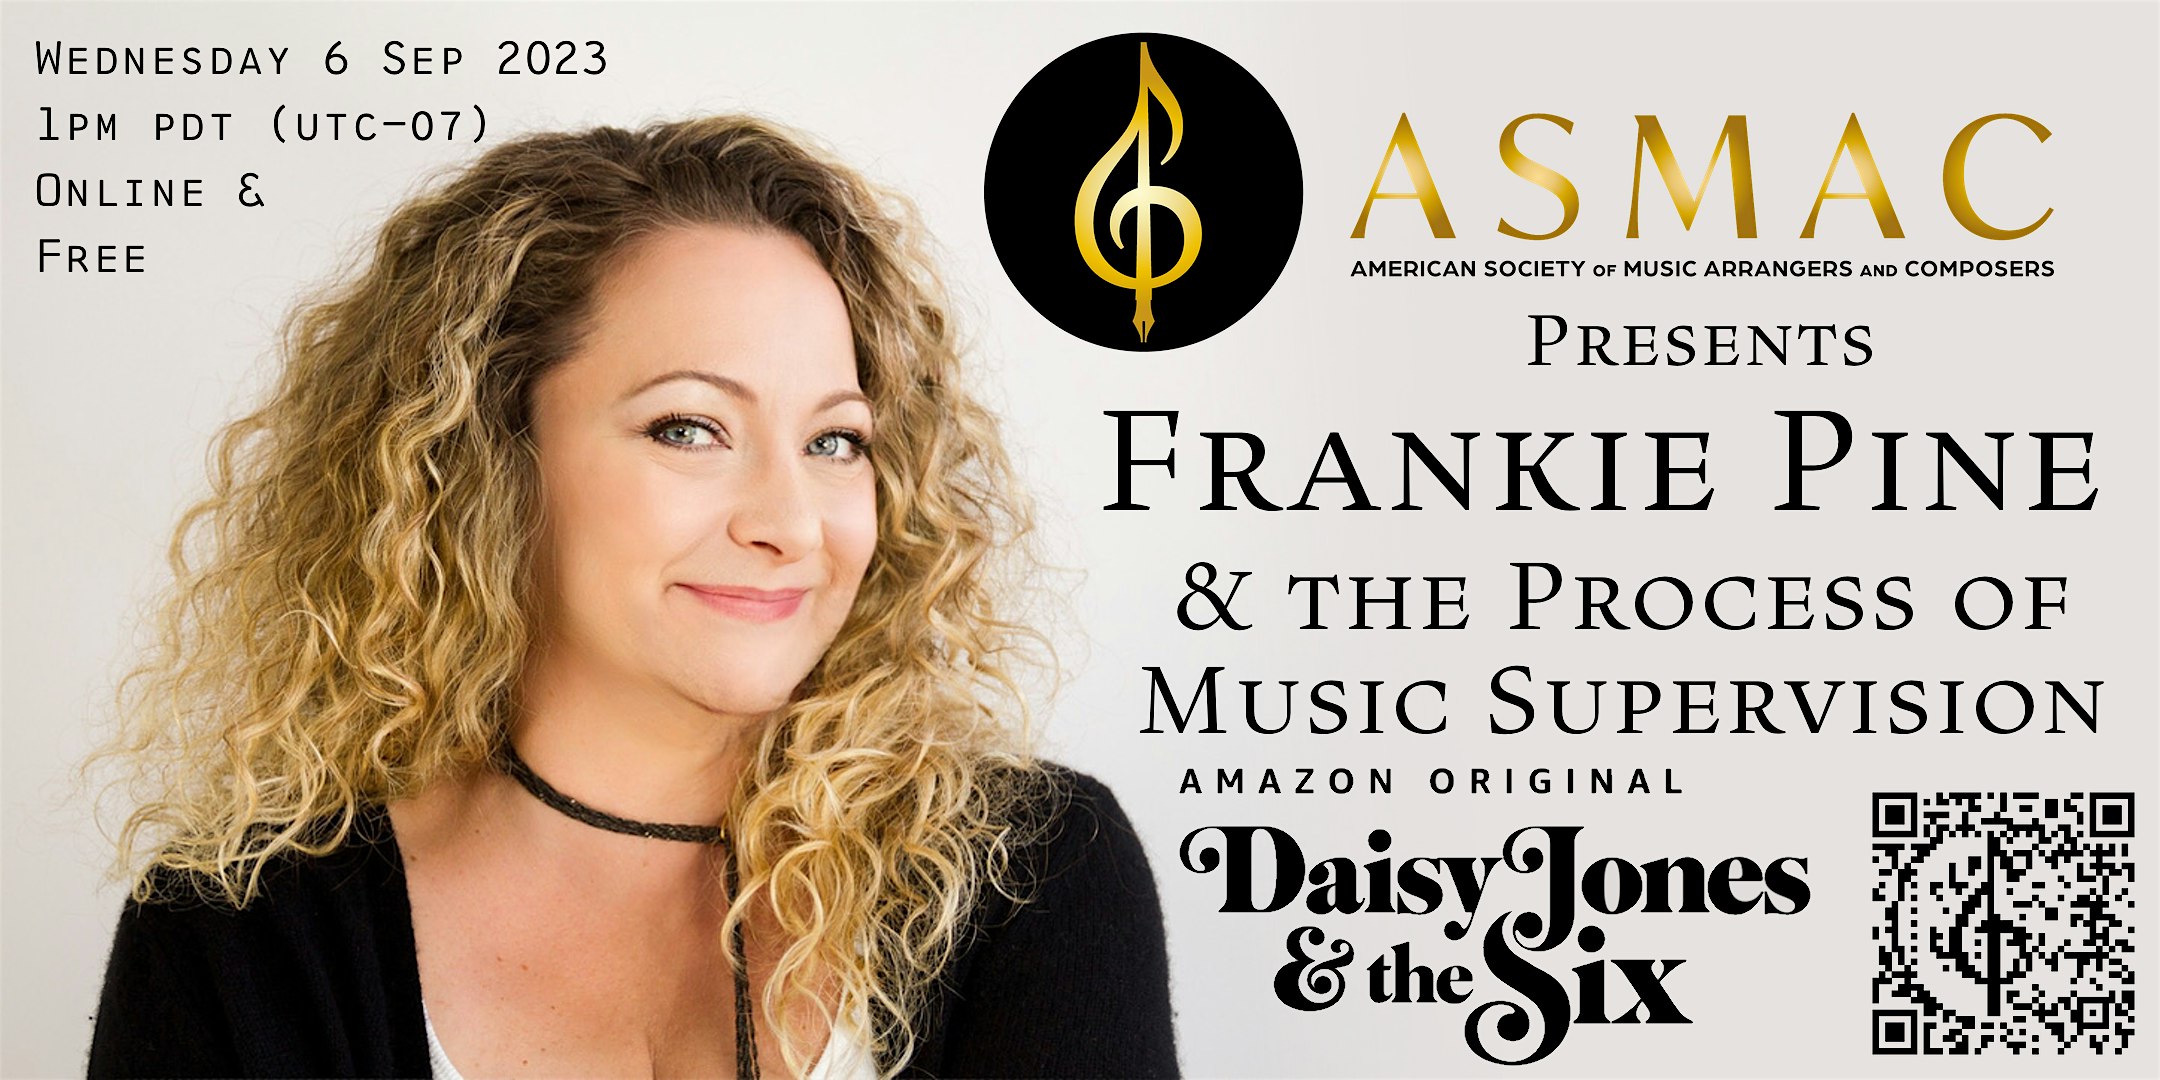 ASMAC presents Frankie Pine & the Process of Music Supervision